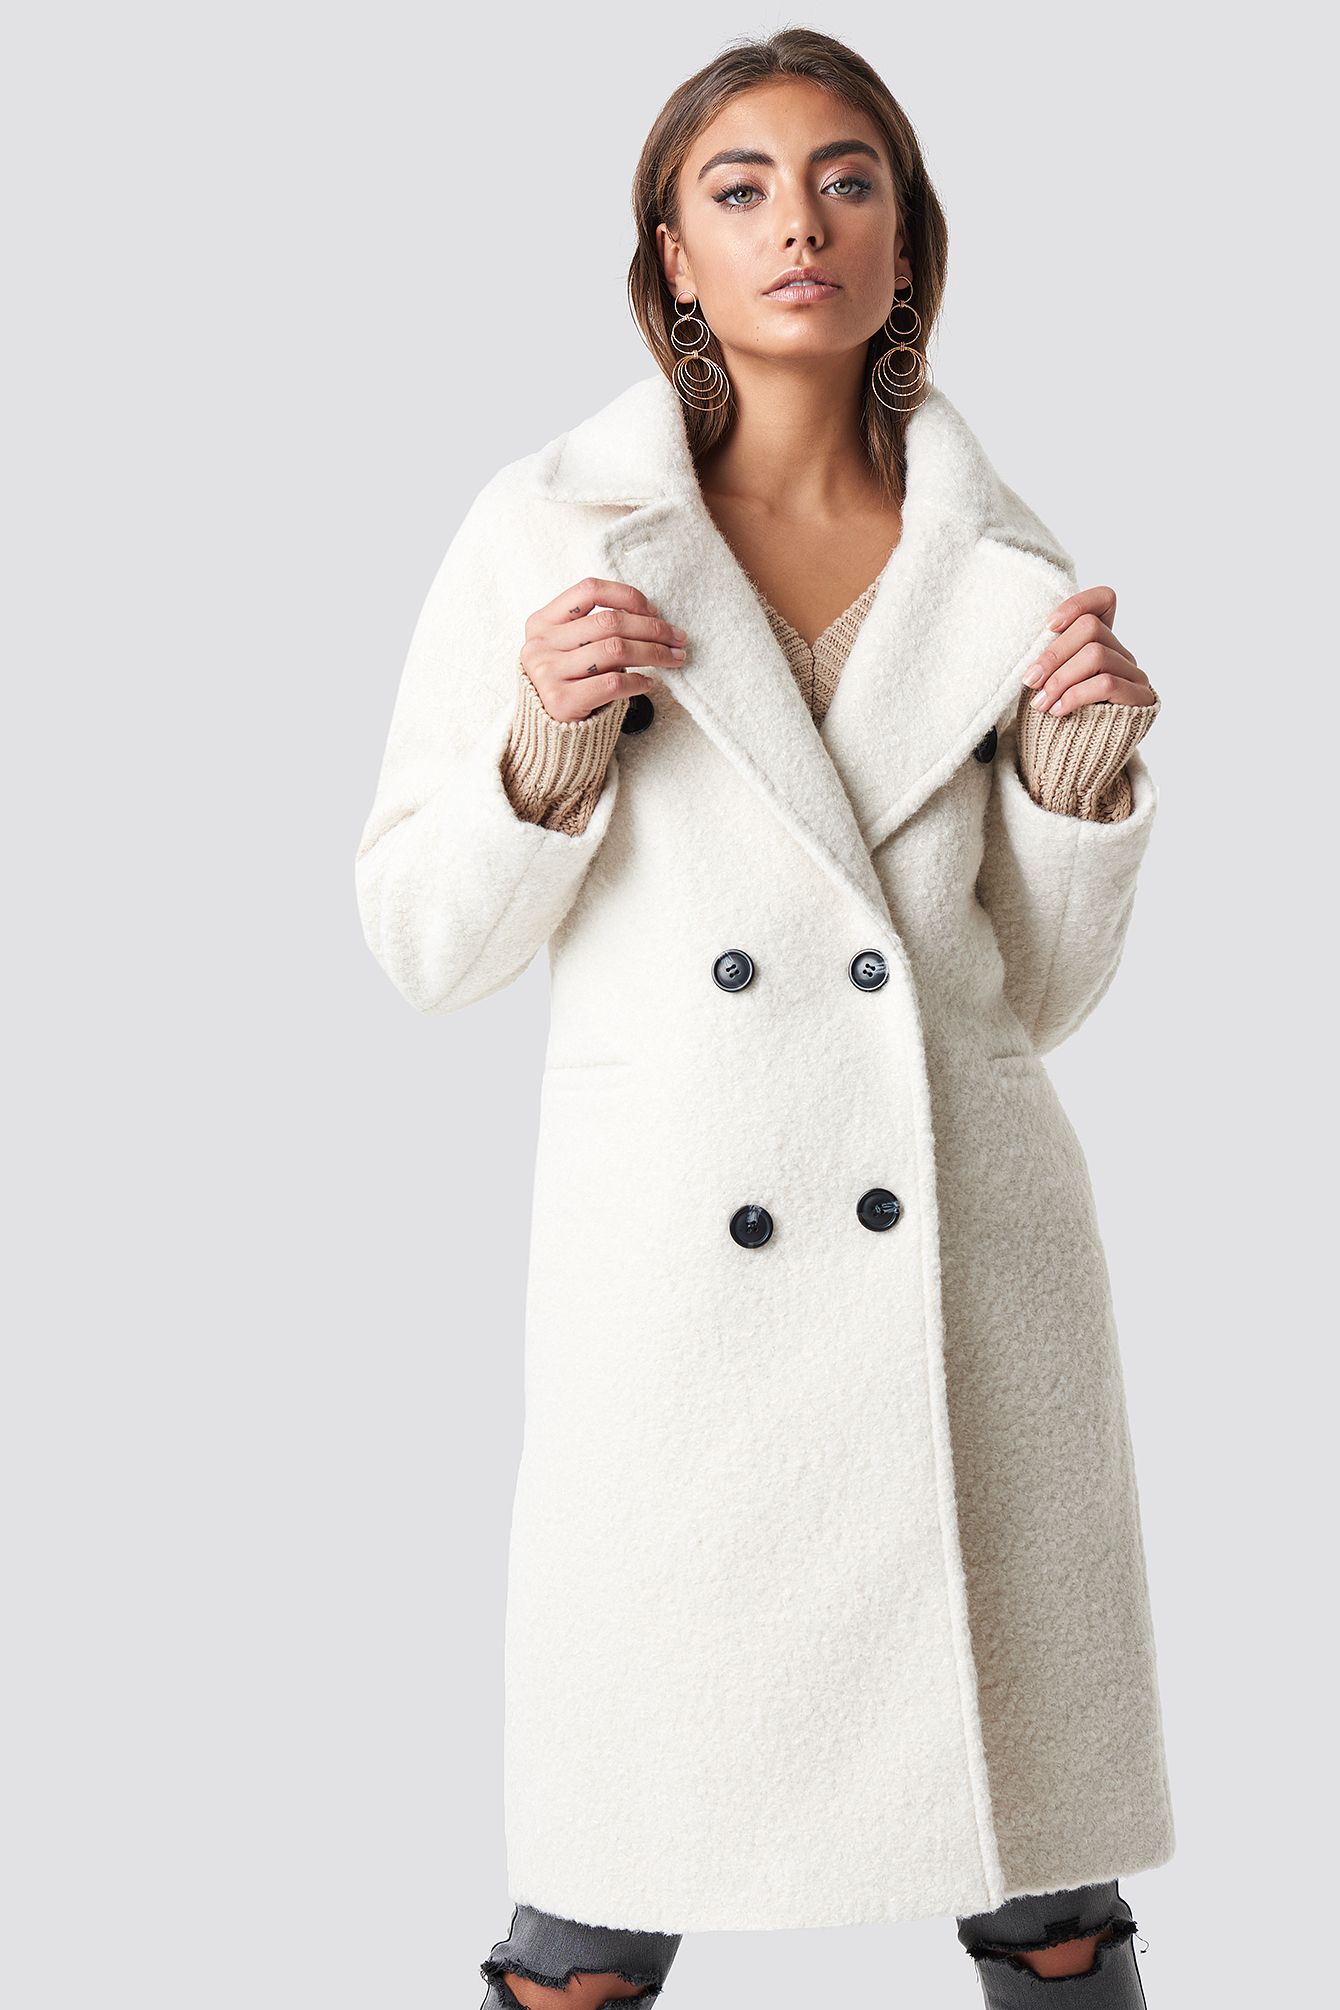 Luisa Lion x NA-KD Structure Double Breasted Coat - White | NA-KD Global